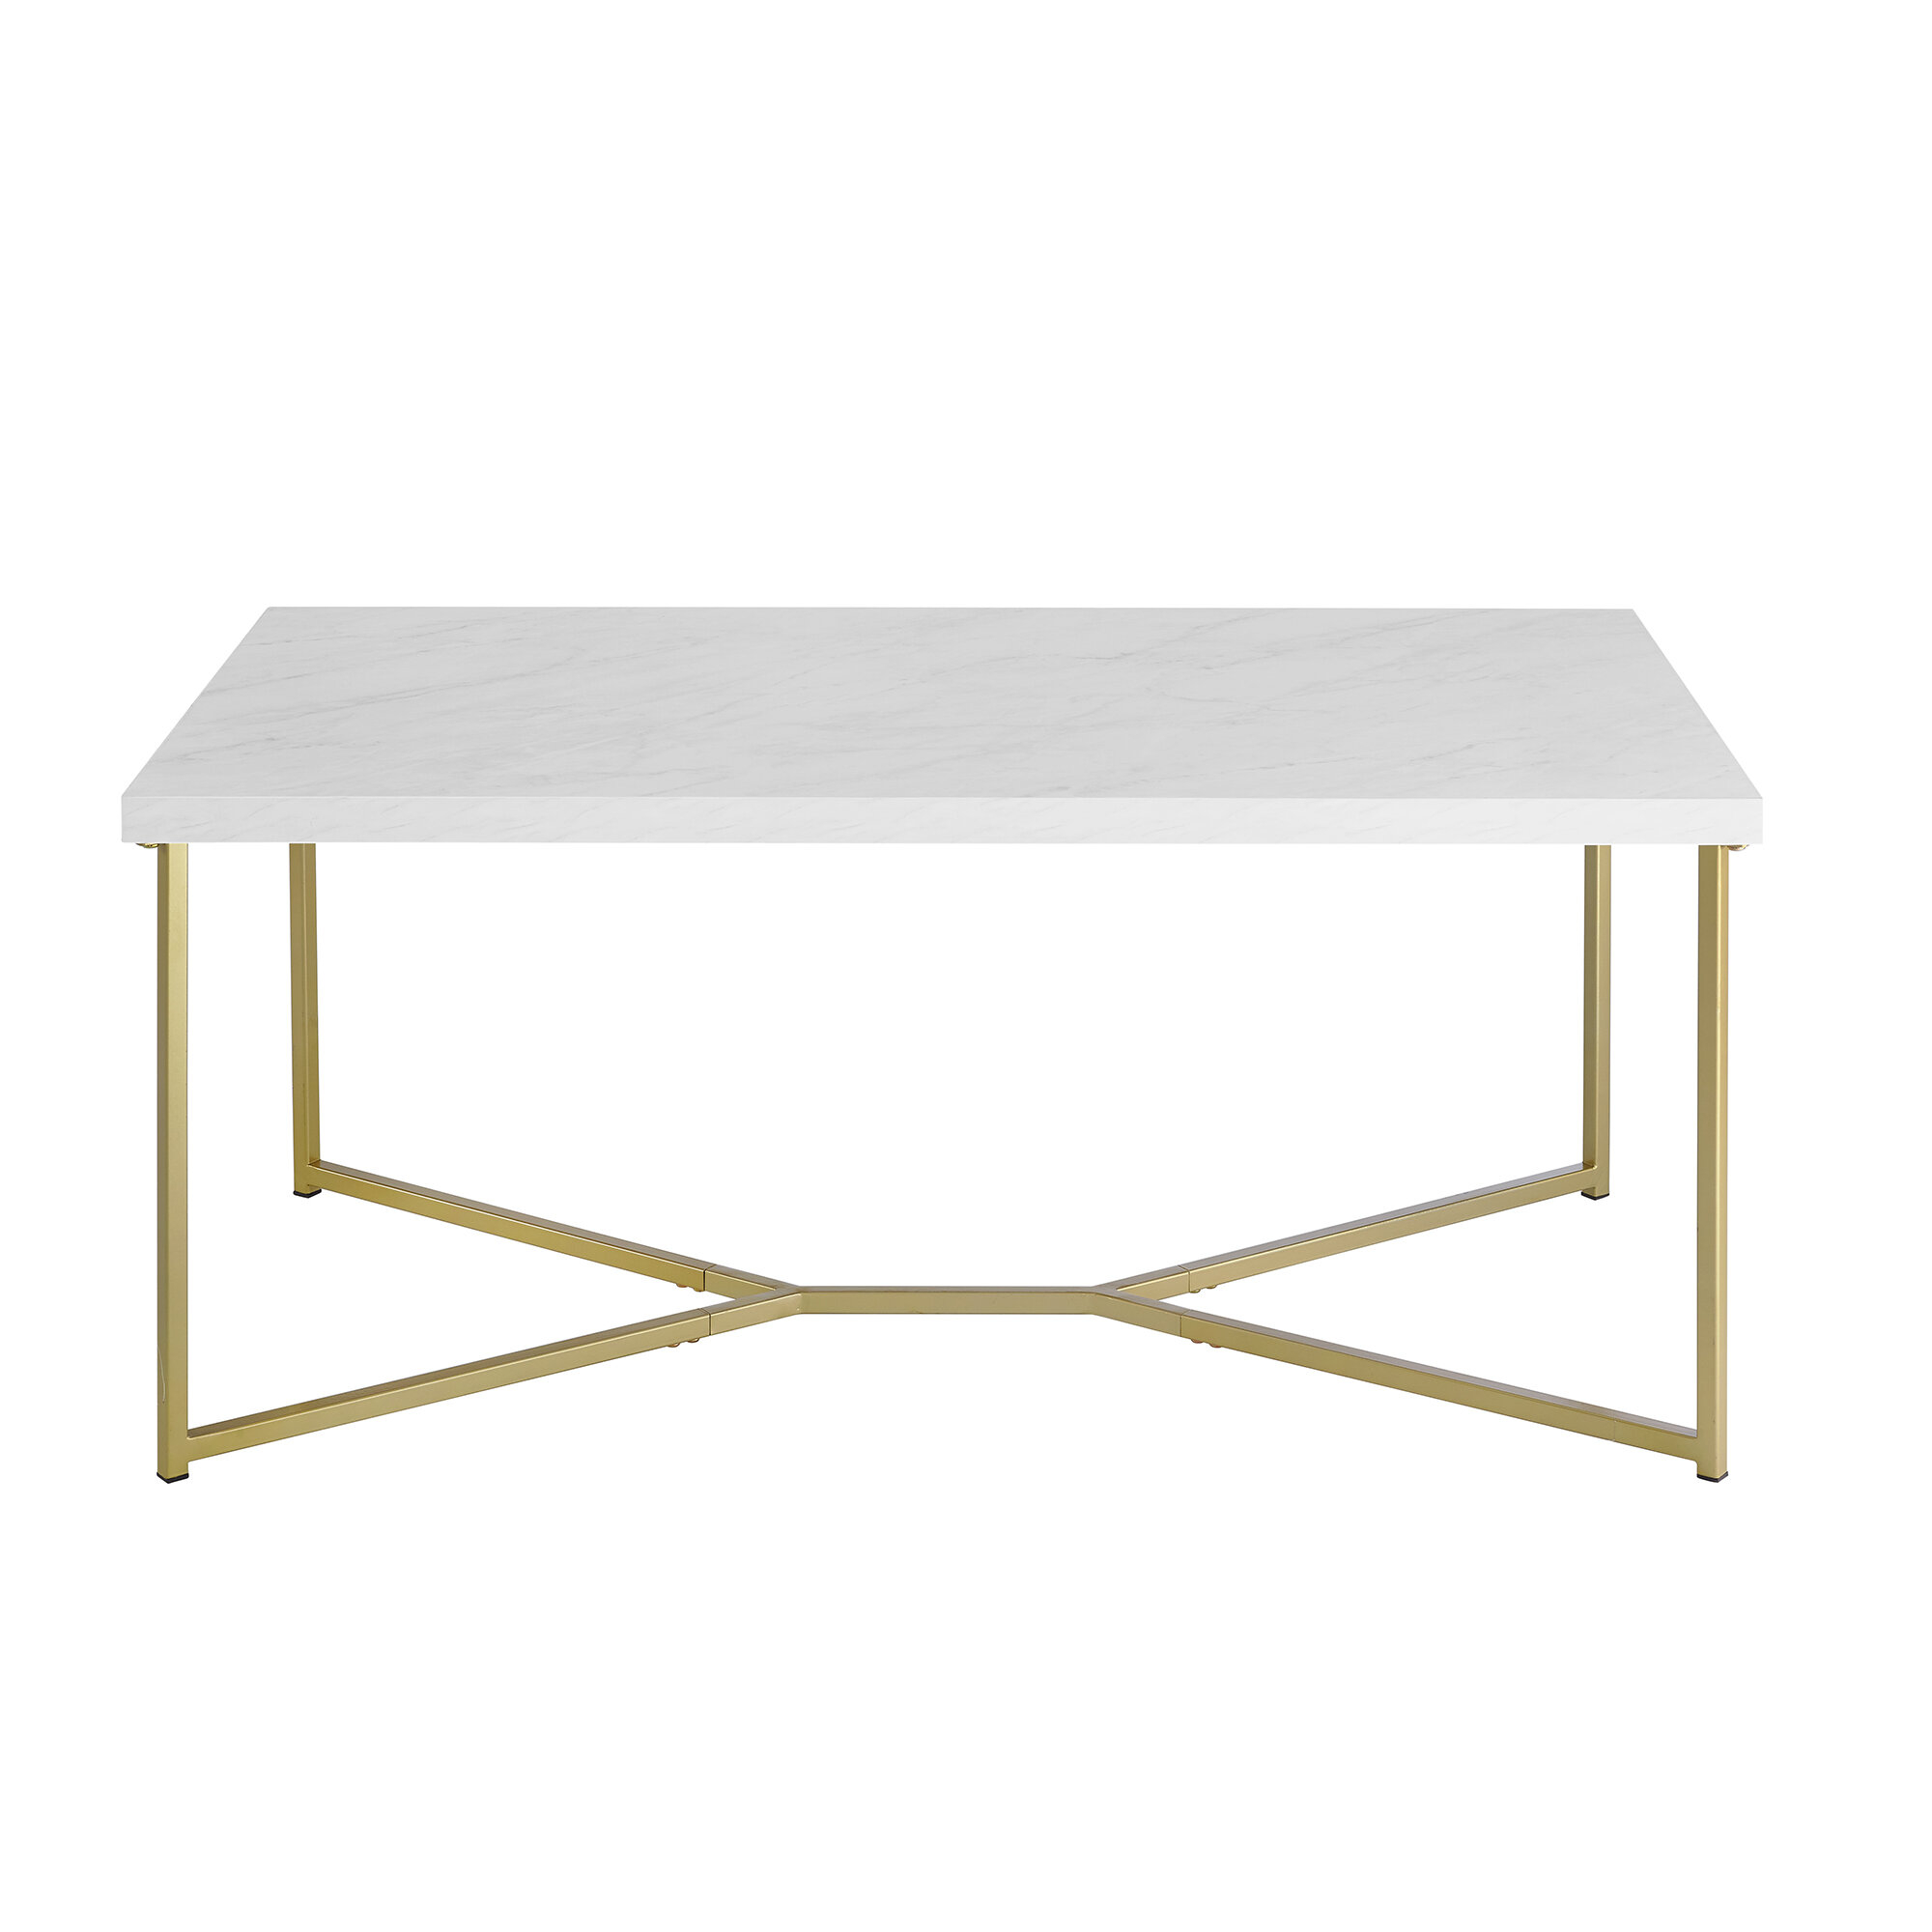 Faux White Marble Coffee Table You Ll Love In 2021 Visualhunt